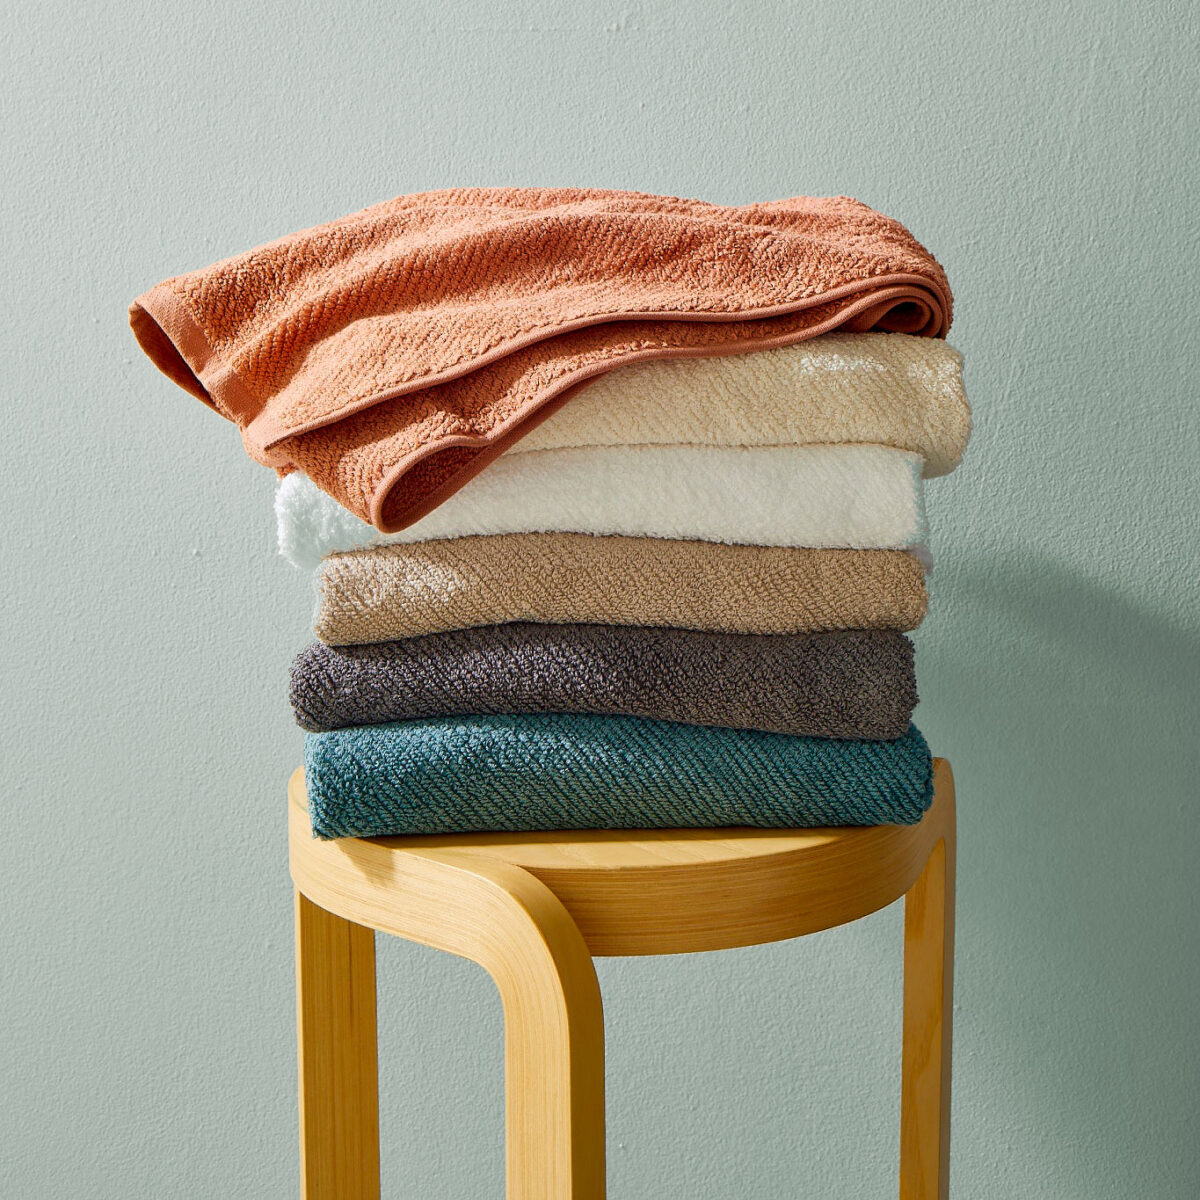 What are the best towels to keep in your bathroom?